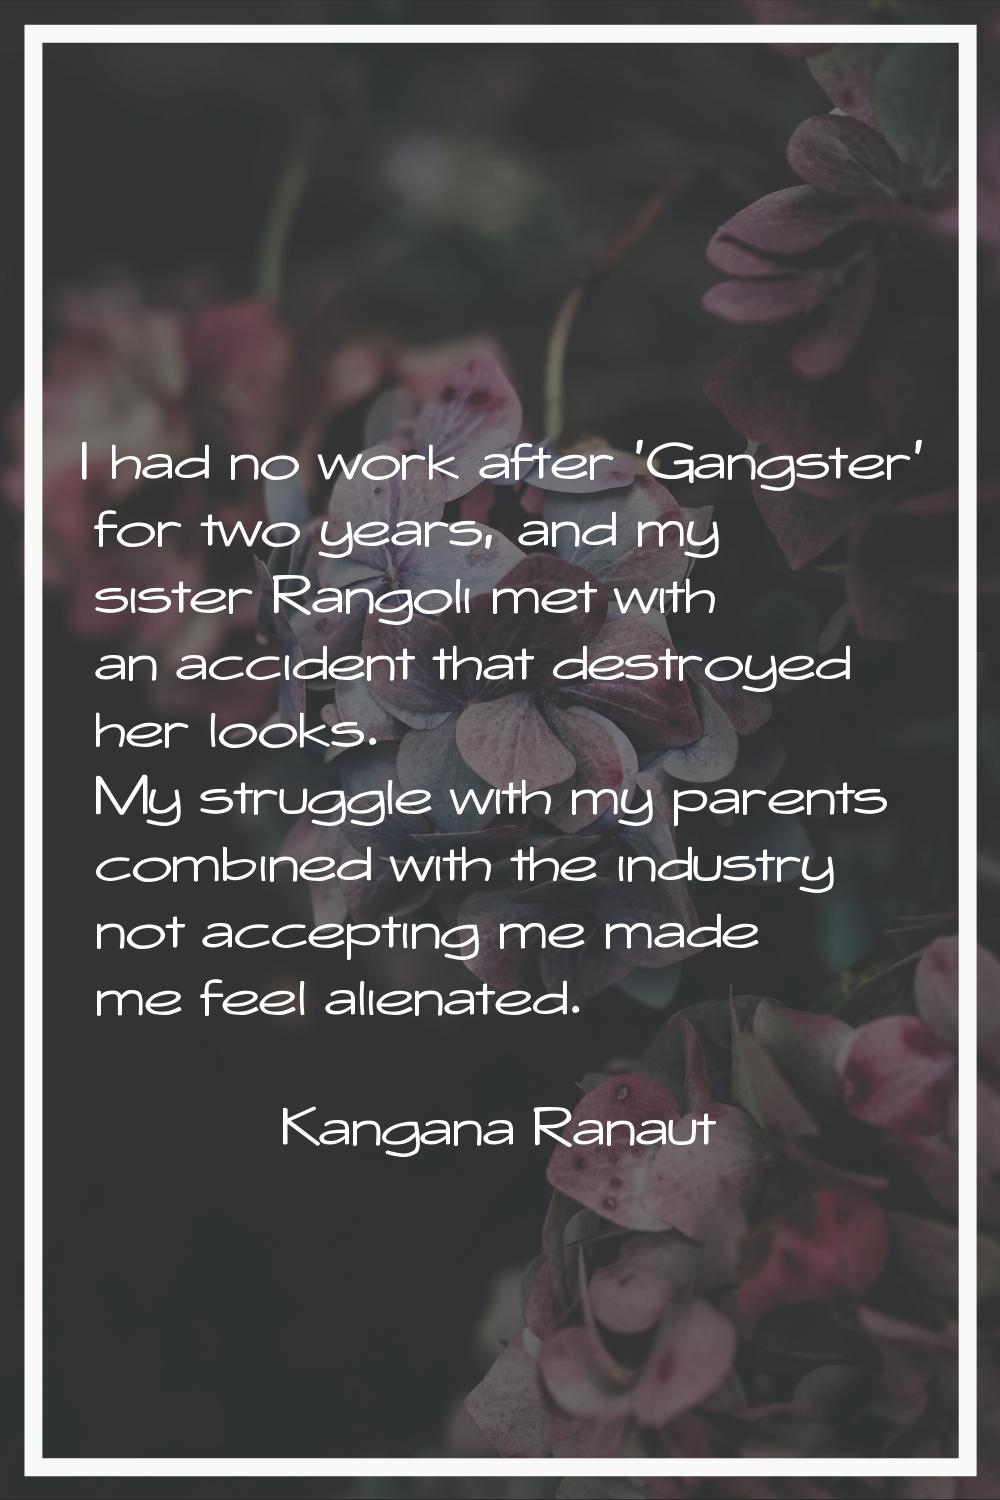 I had no work after 'Gangster' for two years, and my sister Rangoli met with an accident that destr